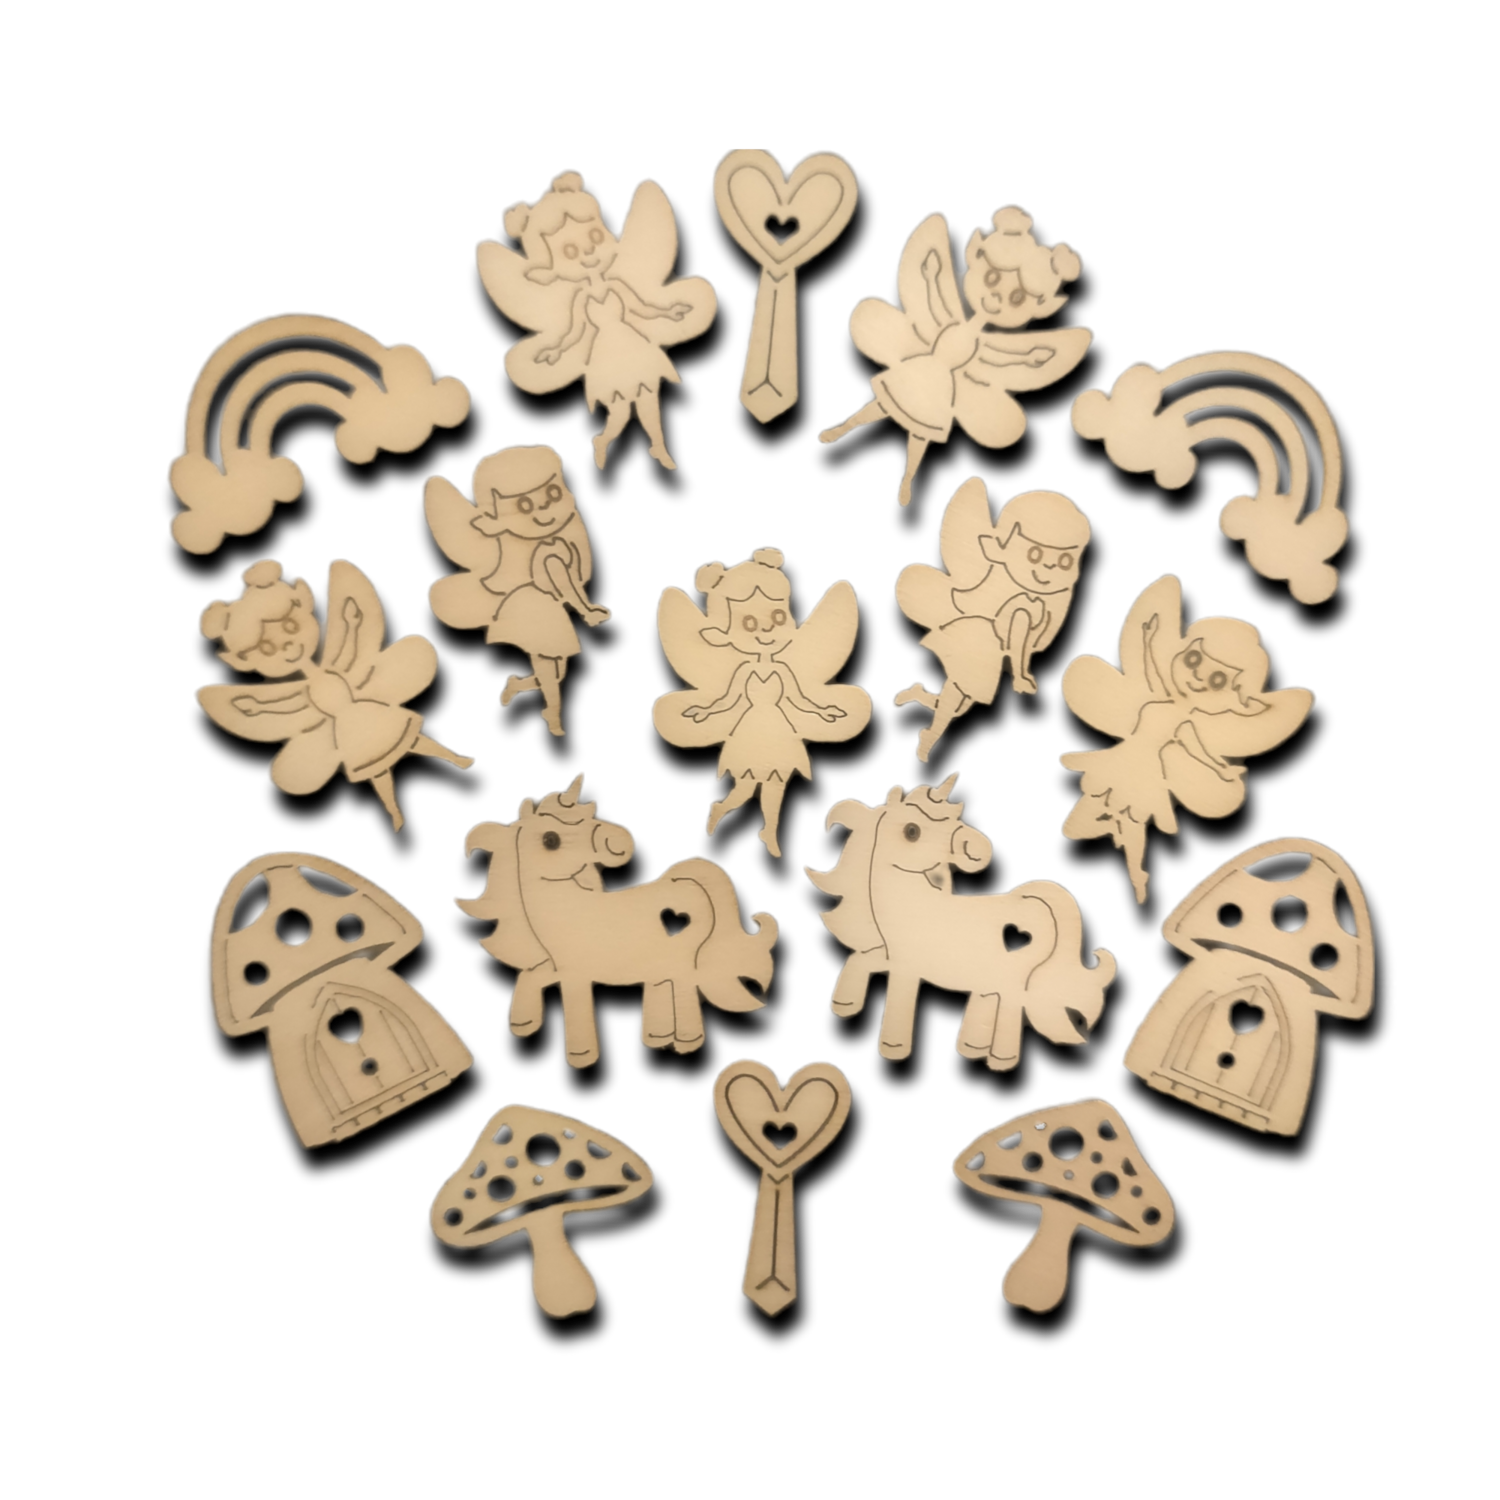 17x Wooden Fairy Garden Shapes For Natural Crafts (3/4x4cm)